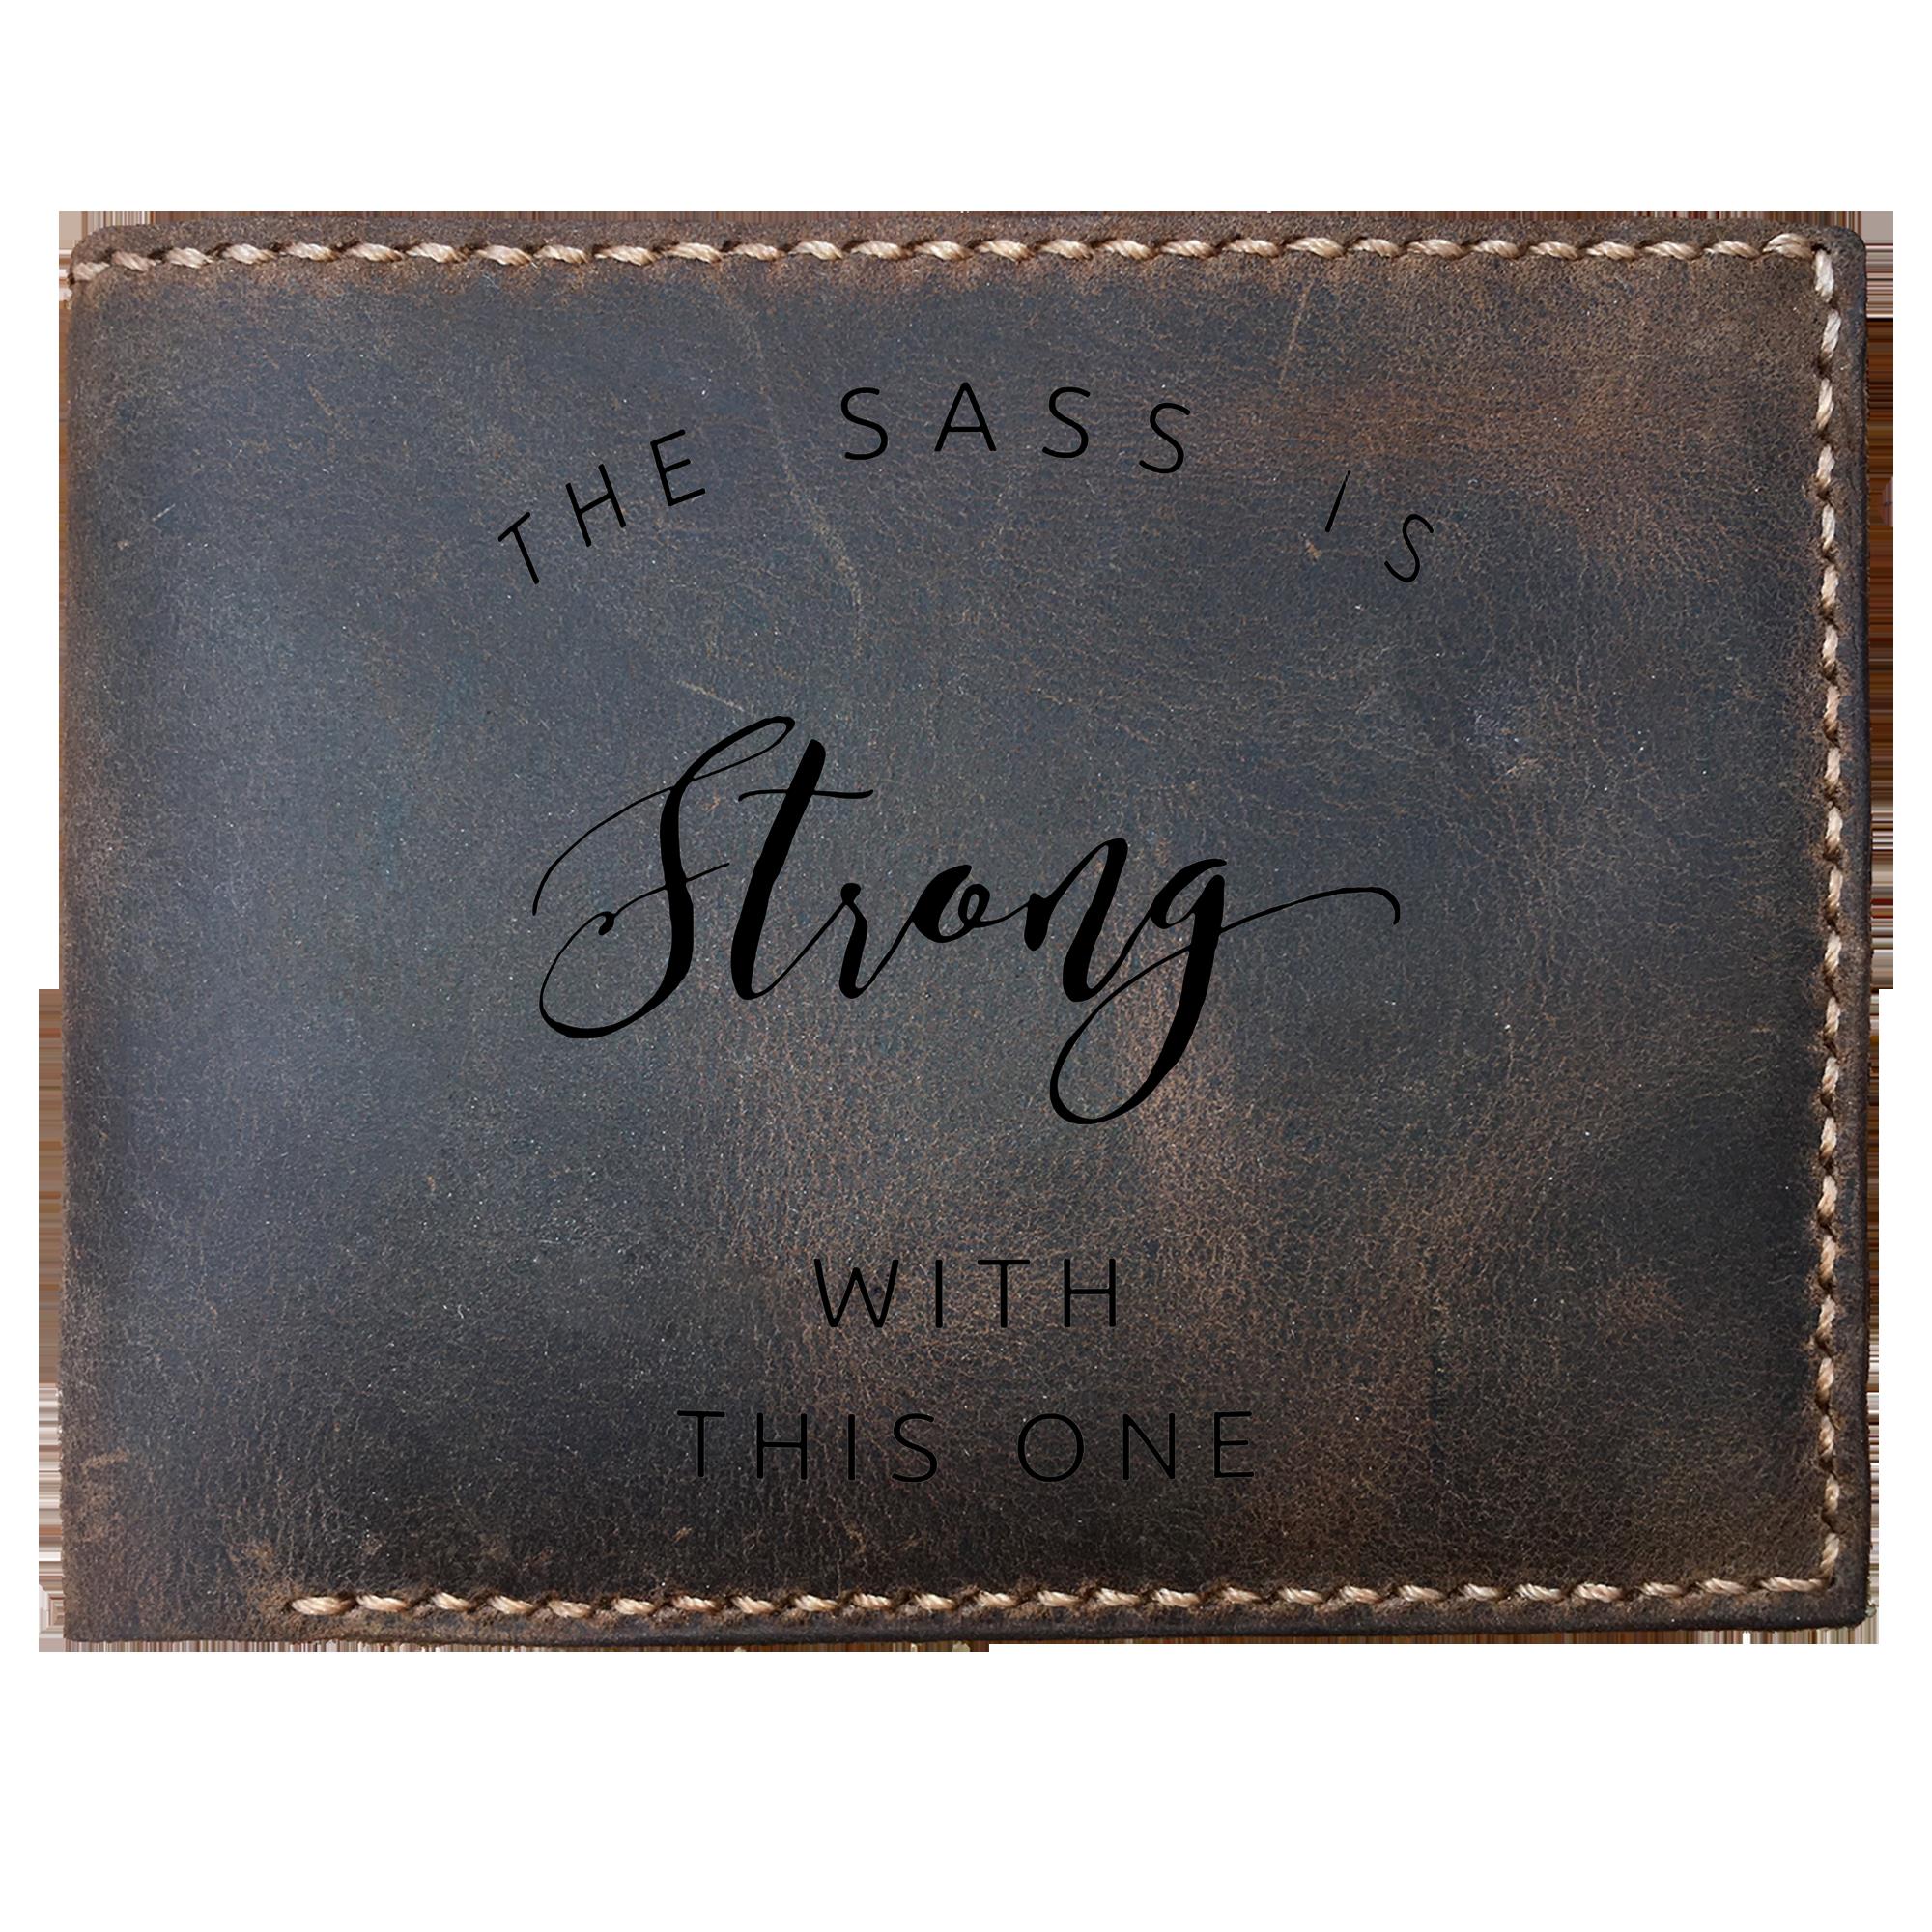 Skitongifts Funny Custom Laser Engraved Bifold Leather Wallet For Men, The Sass Is Strong With This One Funny Birthday Gift